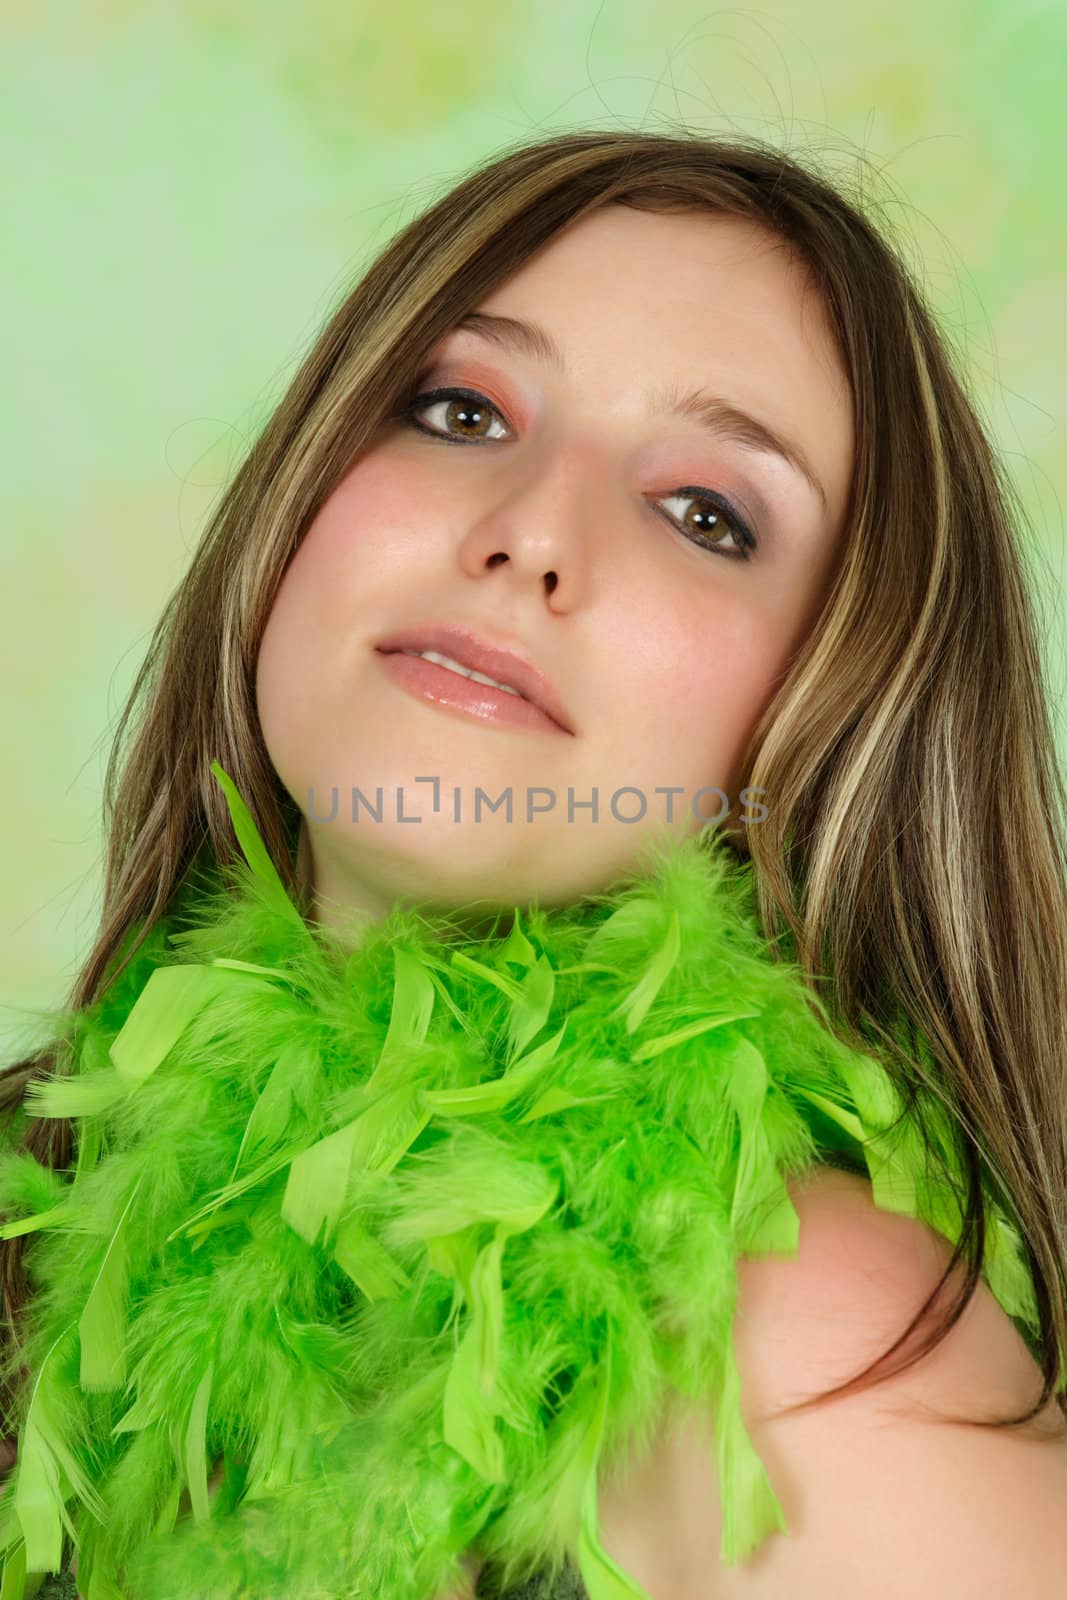 woman with feather boa by lanalanglois